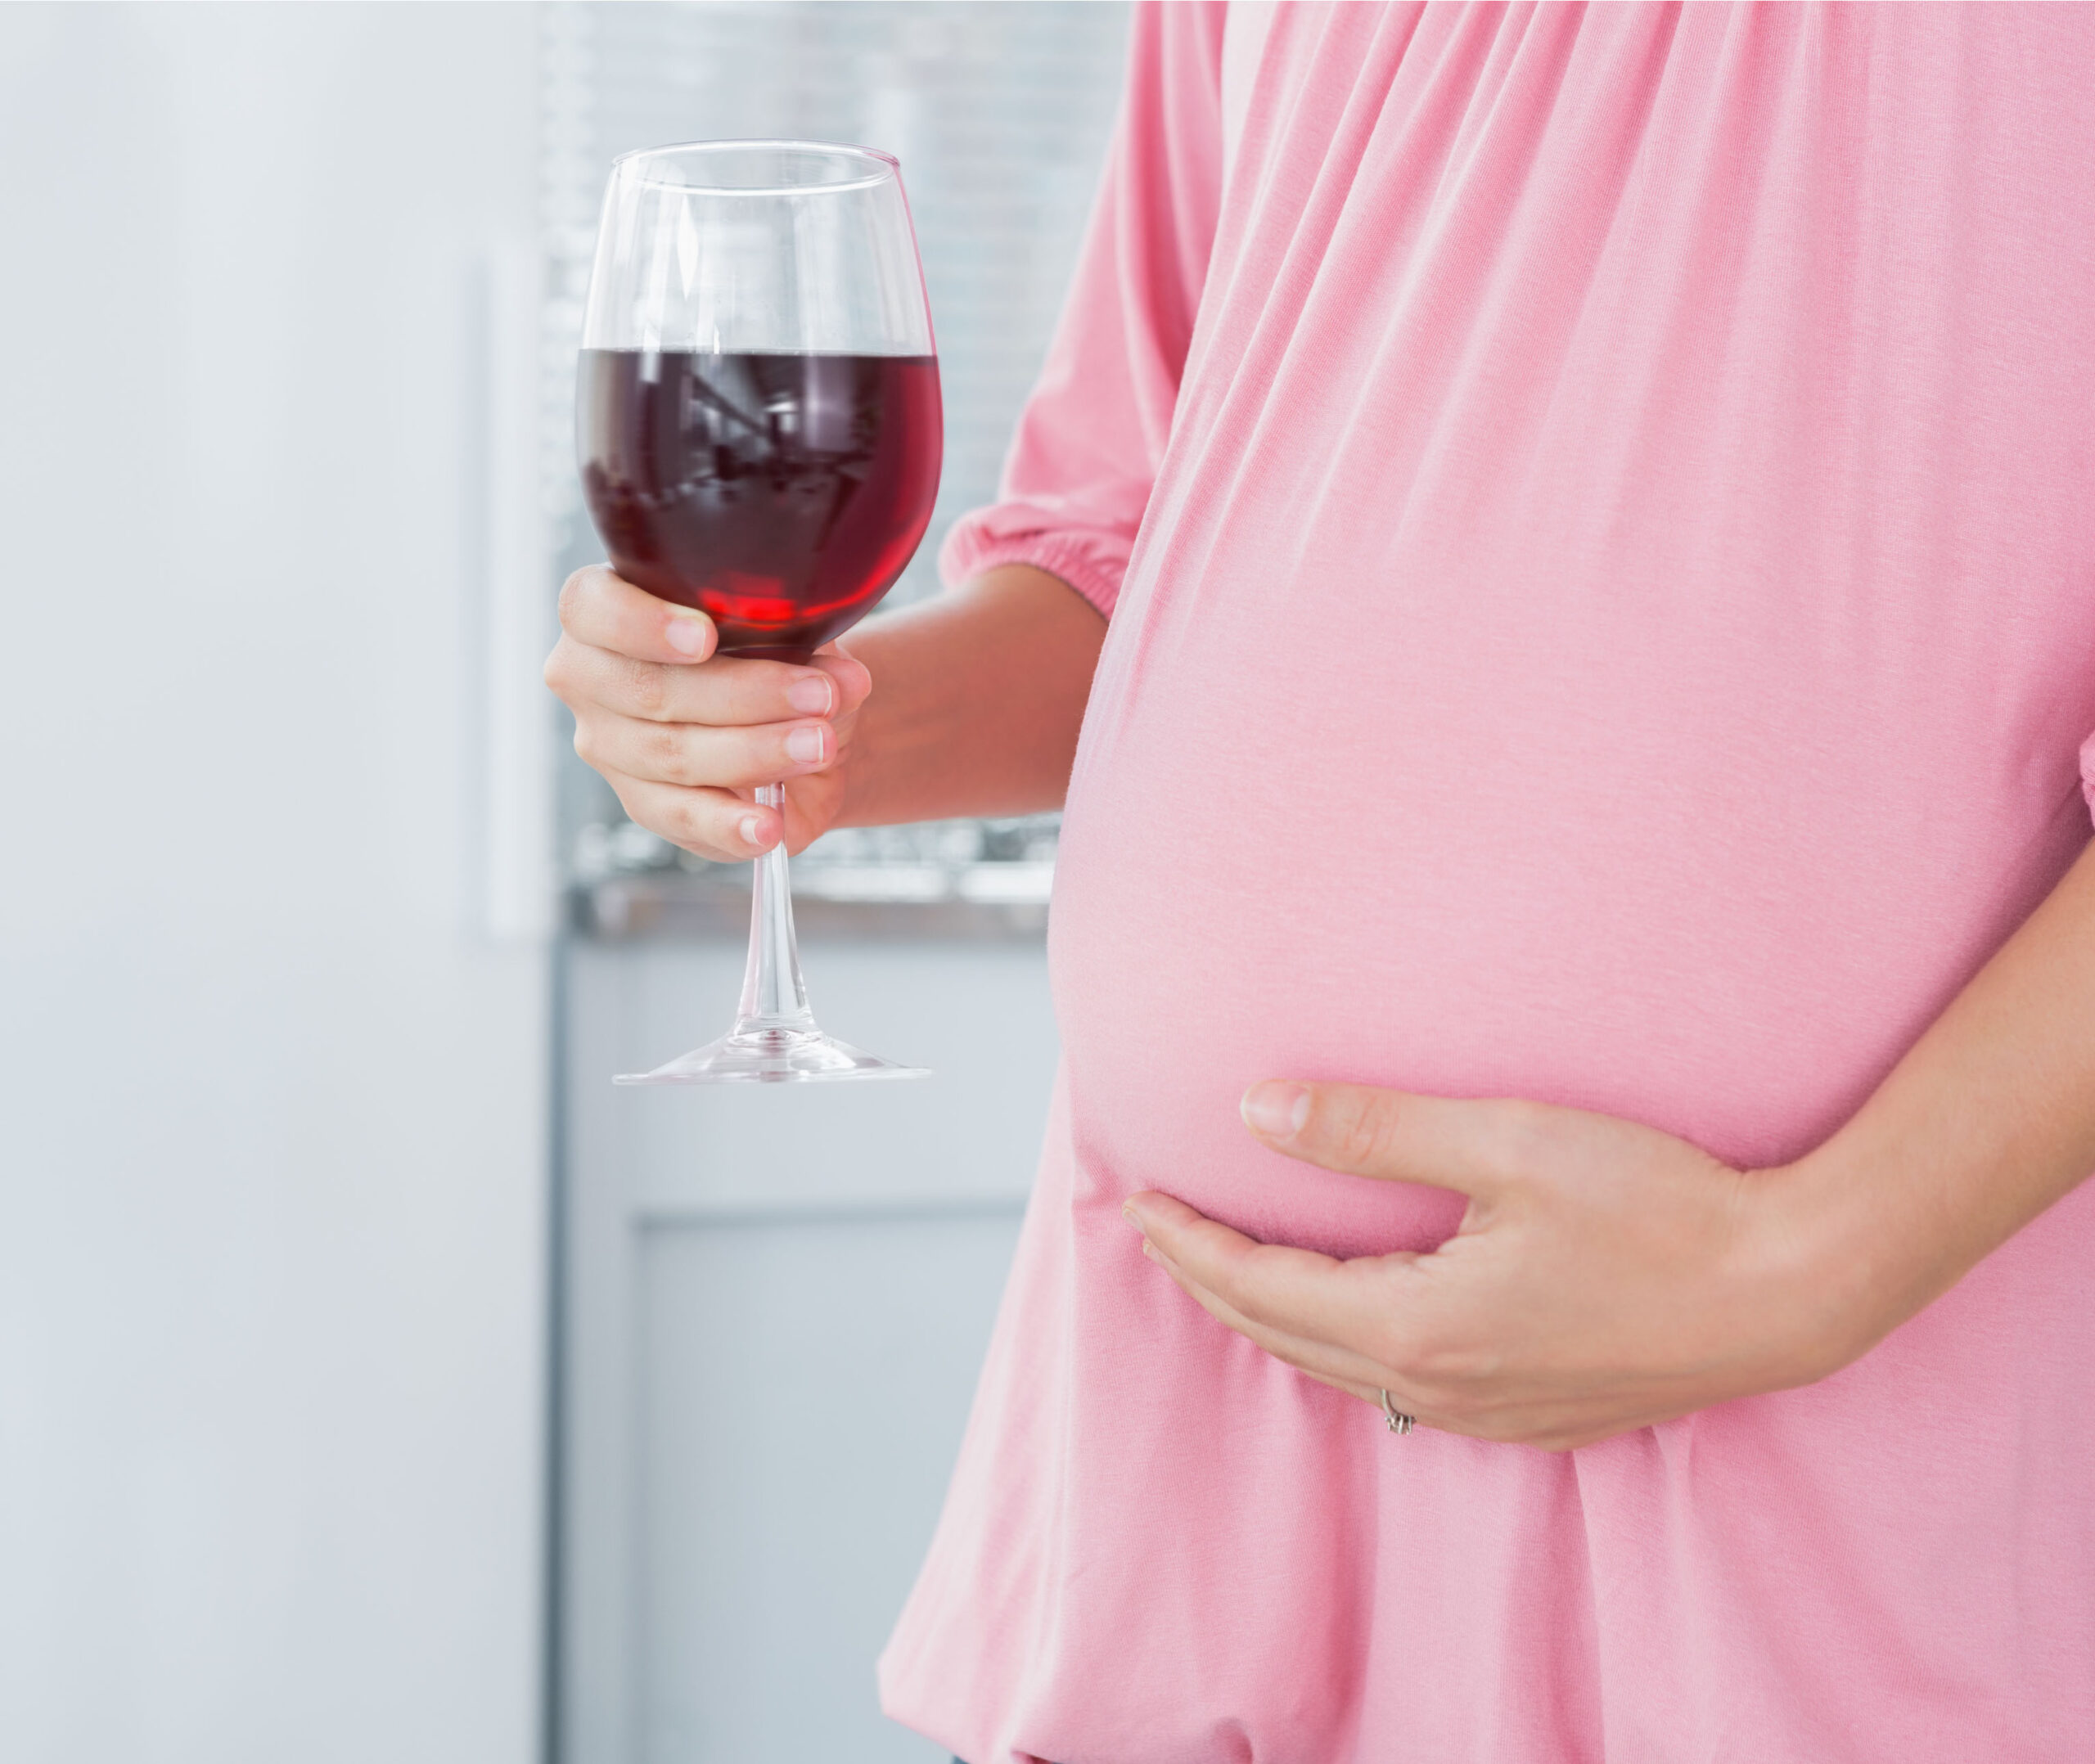 Alcohol exposure in the womb can lead to sleep problems